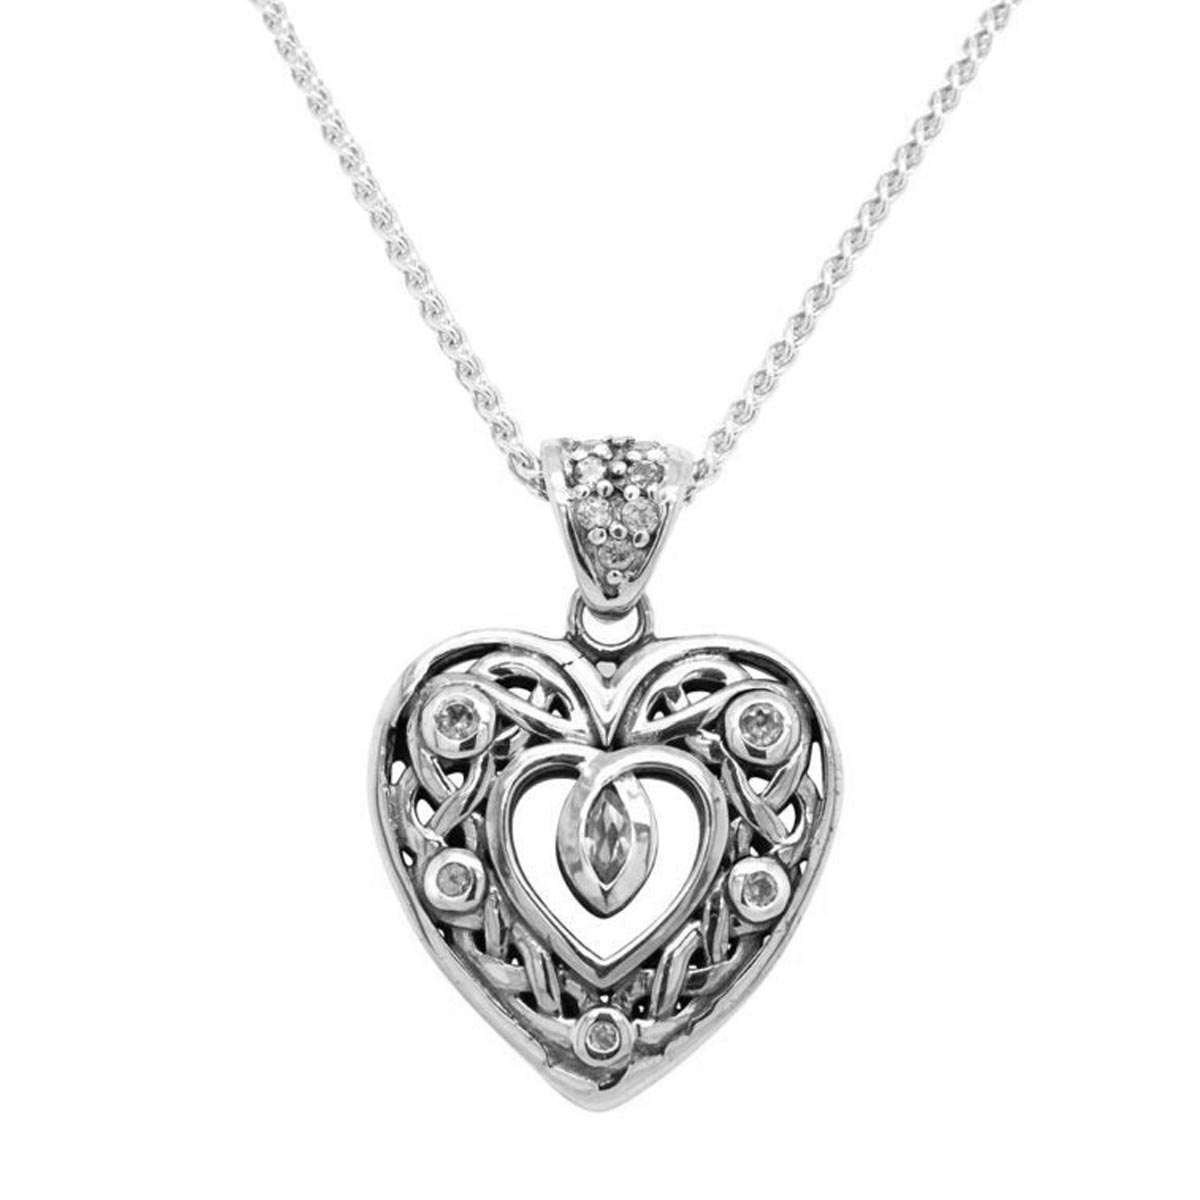 Keith Jack Celtic Open Heart Cubic Zirconia Necklace in Sterling Silver